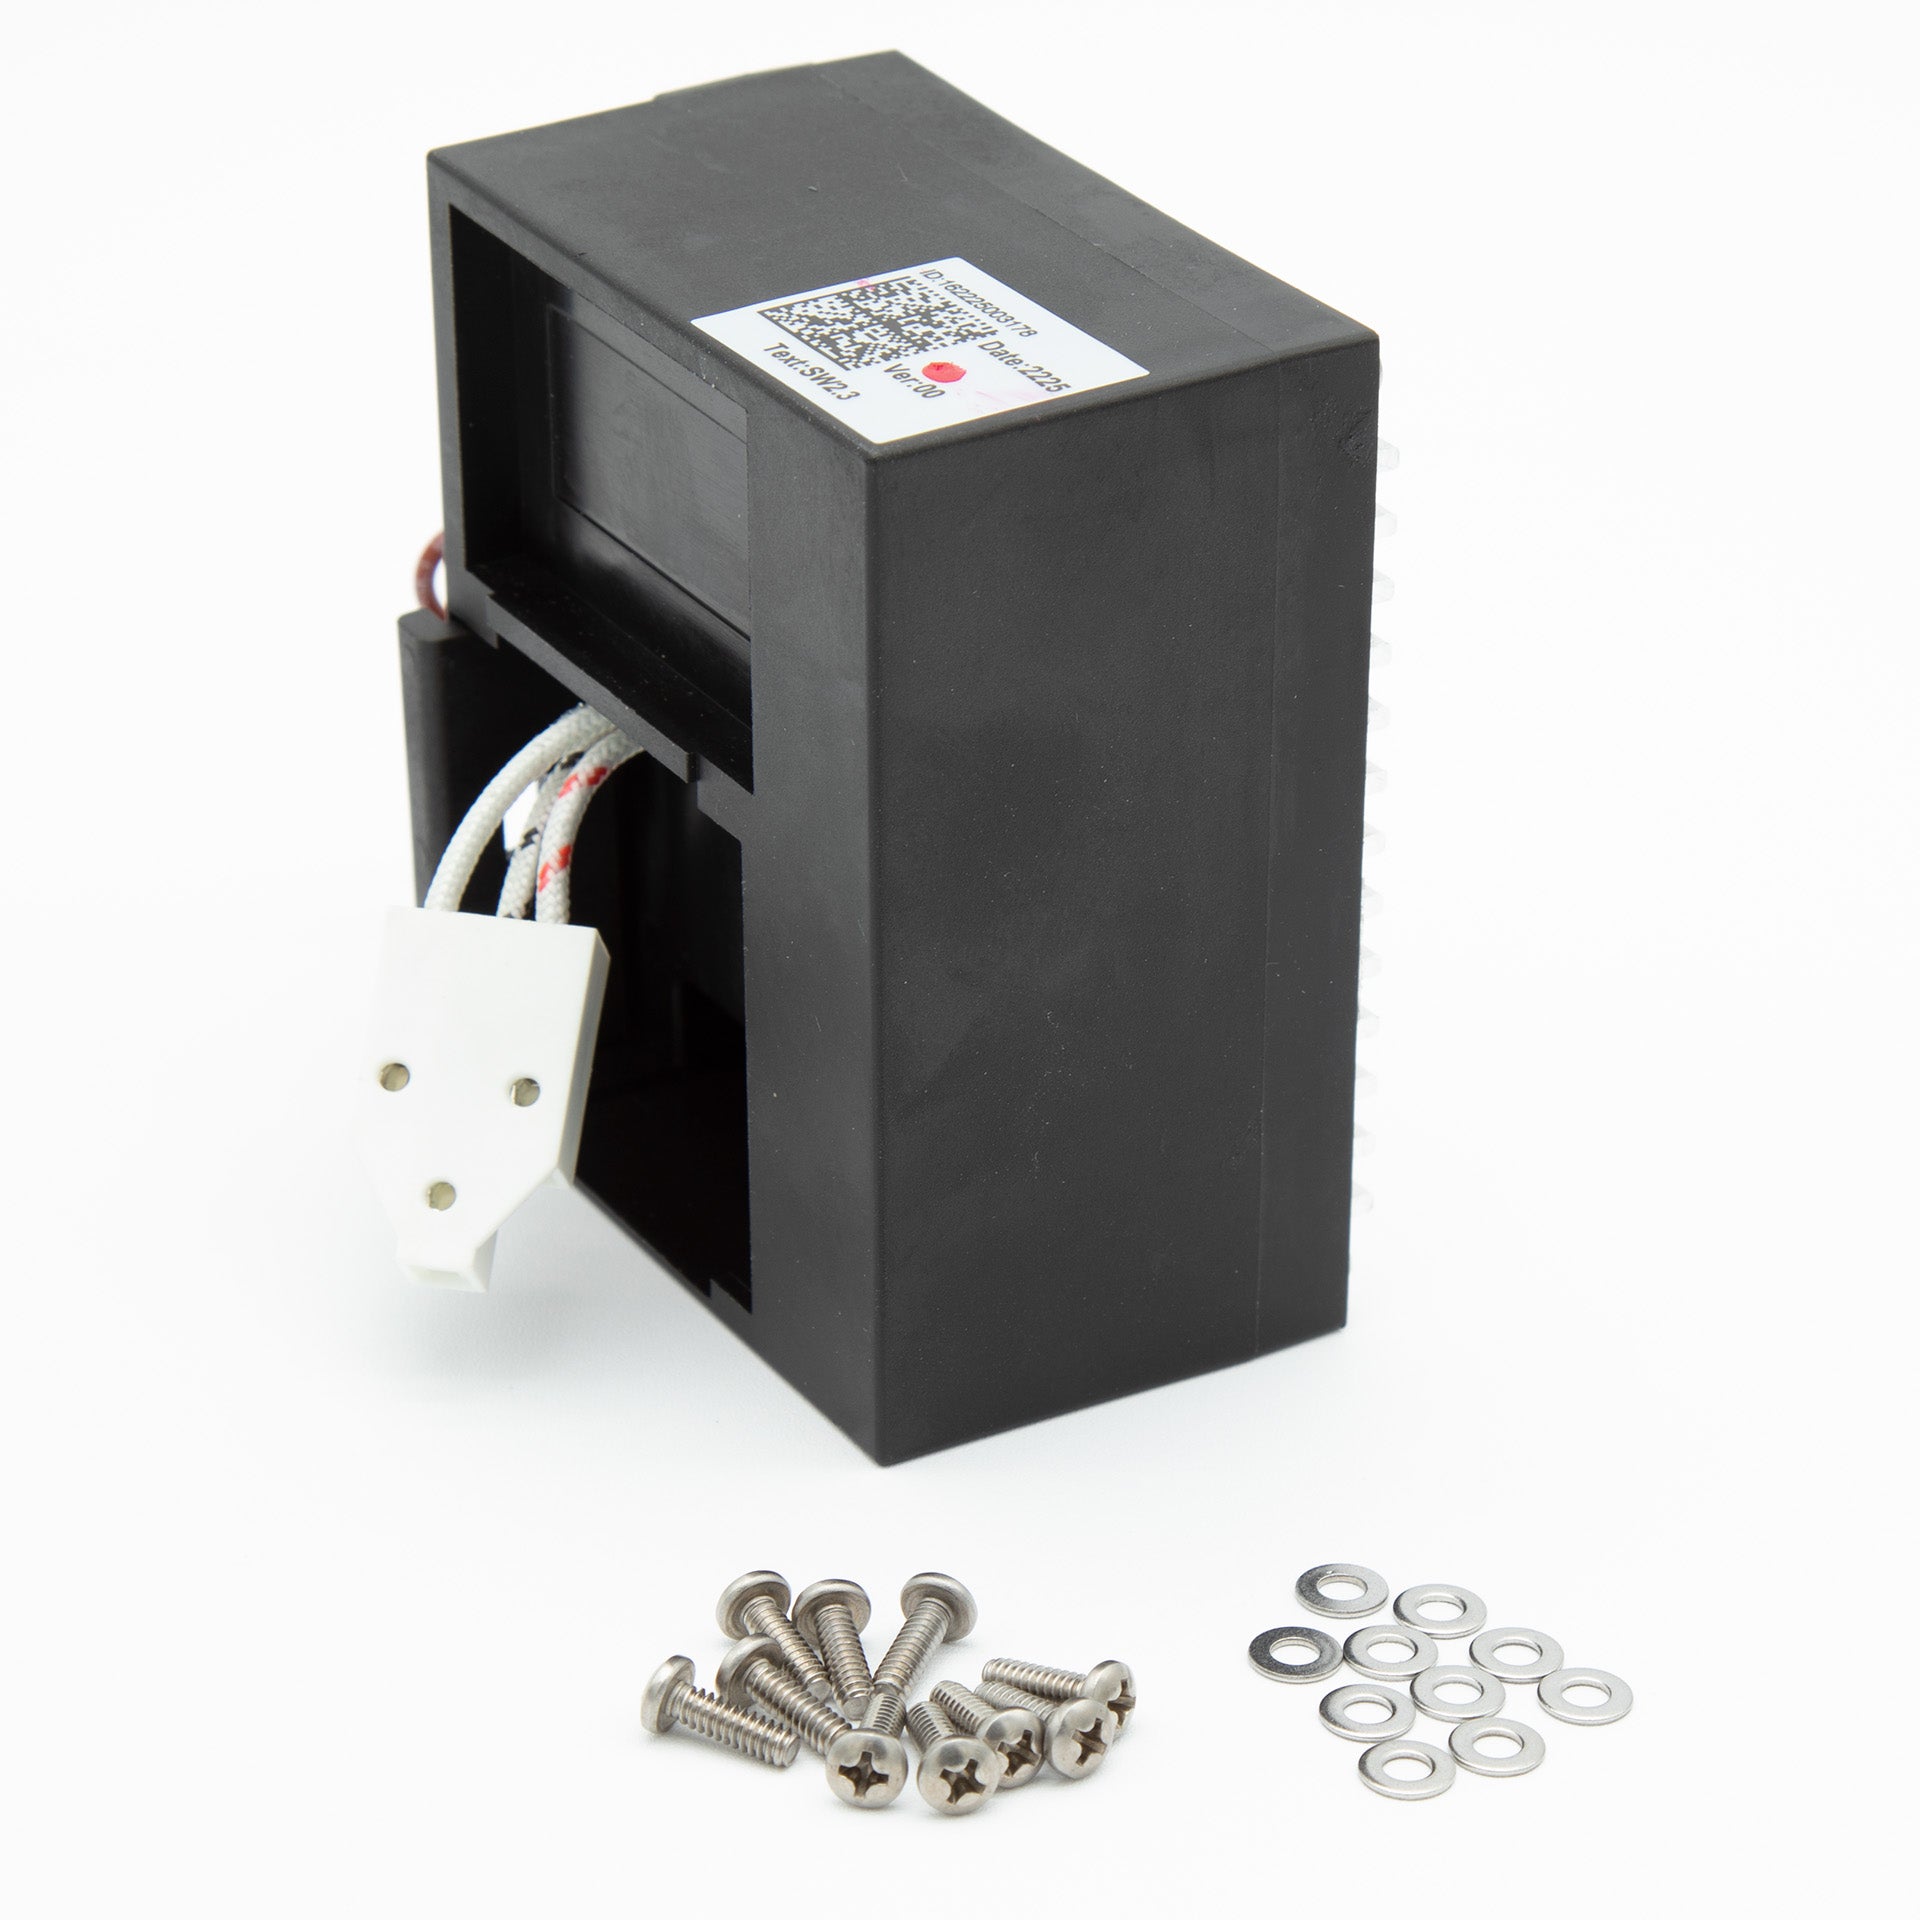 Square compressor box with screws and washers.